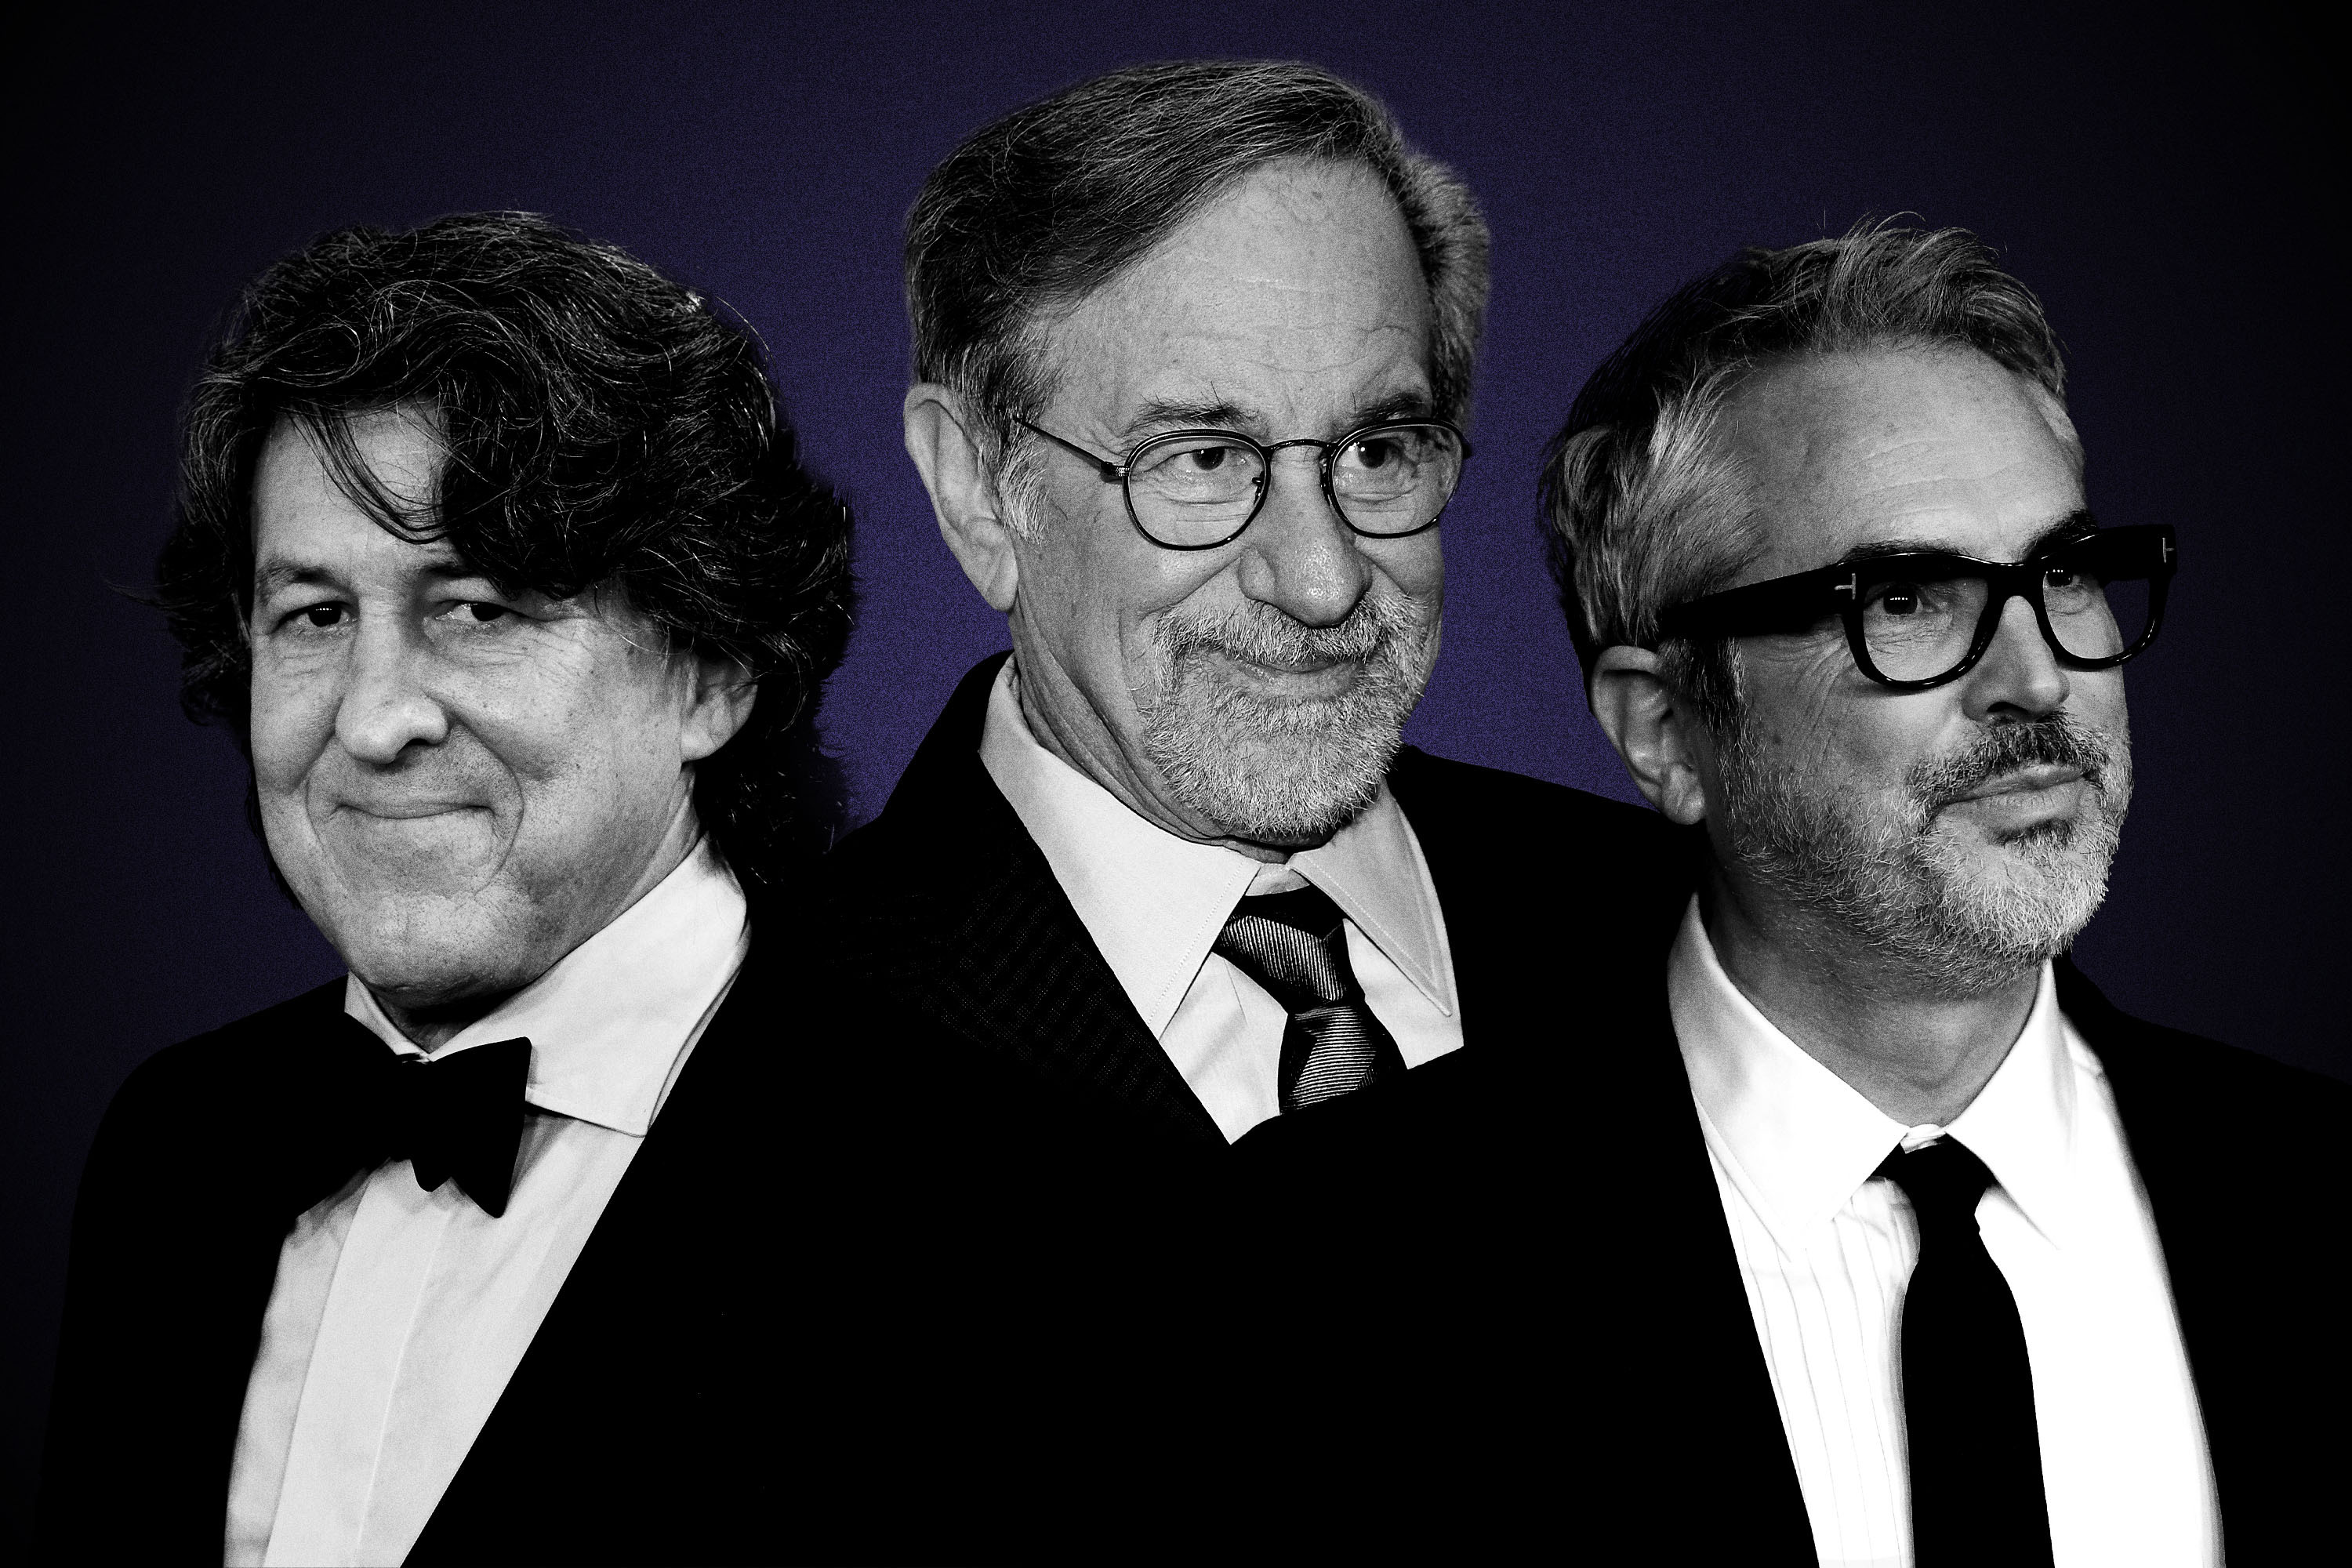 Cameron Crowe, Steven Spielberg and Alfonso Cuaron